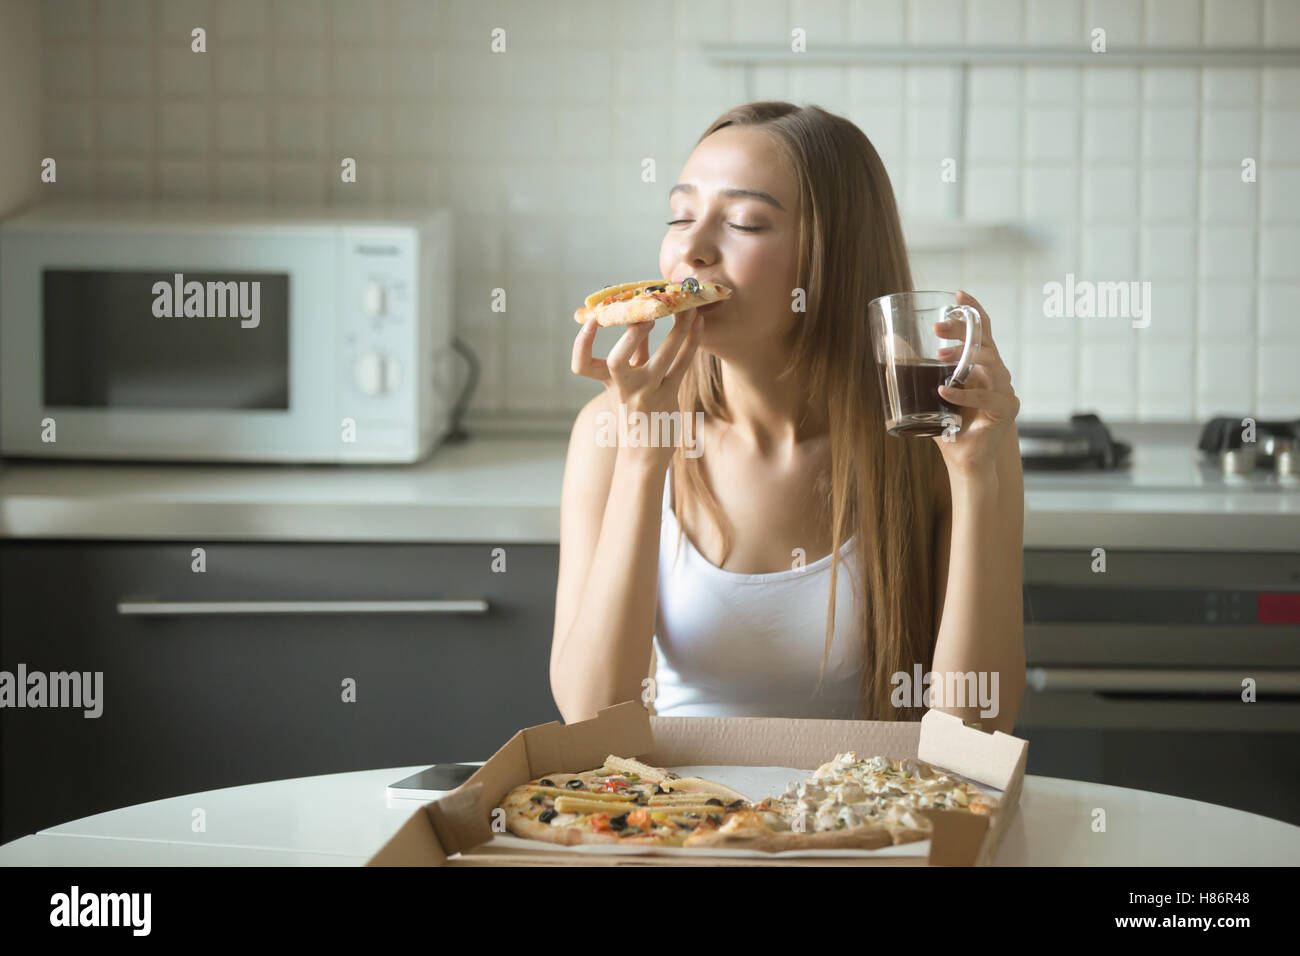 Portrait of a young woman eating pizza on the kitchen Stock Photo